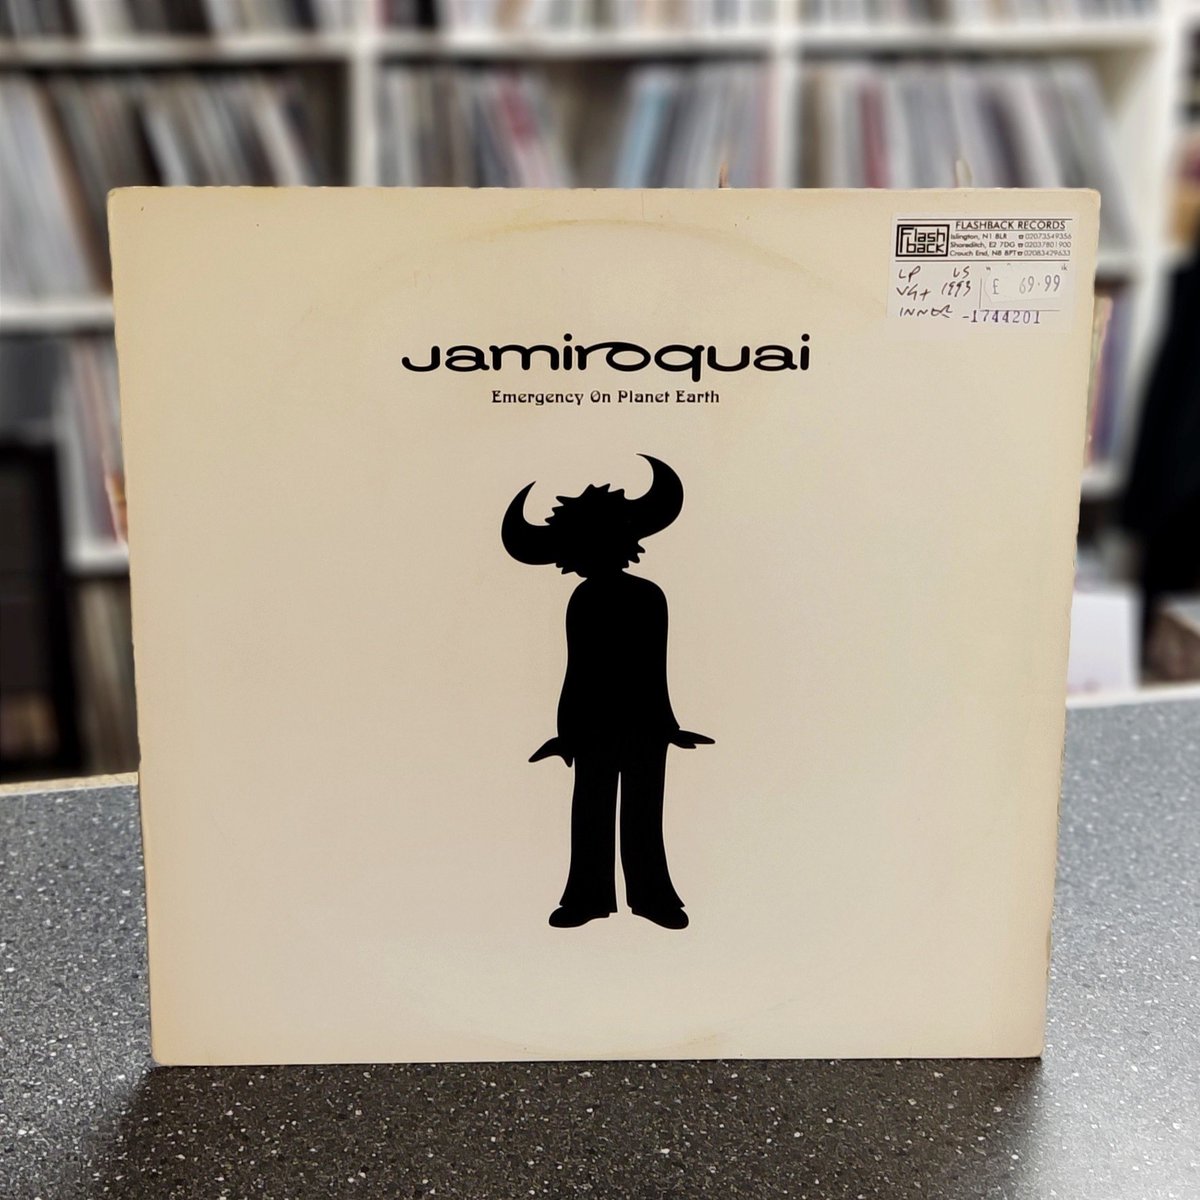 Our Shoreditch shop recently received a US first pressing of Jamiroquai's debut album 'Emergency on Planet Earth' (1993). A fusion of funk, acid jazz, and soul, featuring dynamic grooves.

#jamiroquai #acidjazz #soul #funk #recordshop #music #vinyl #flashback #flashbackrecords